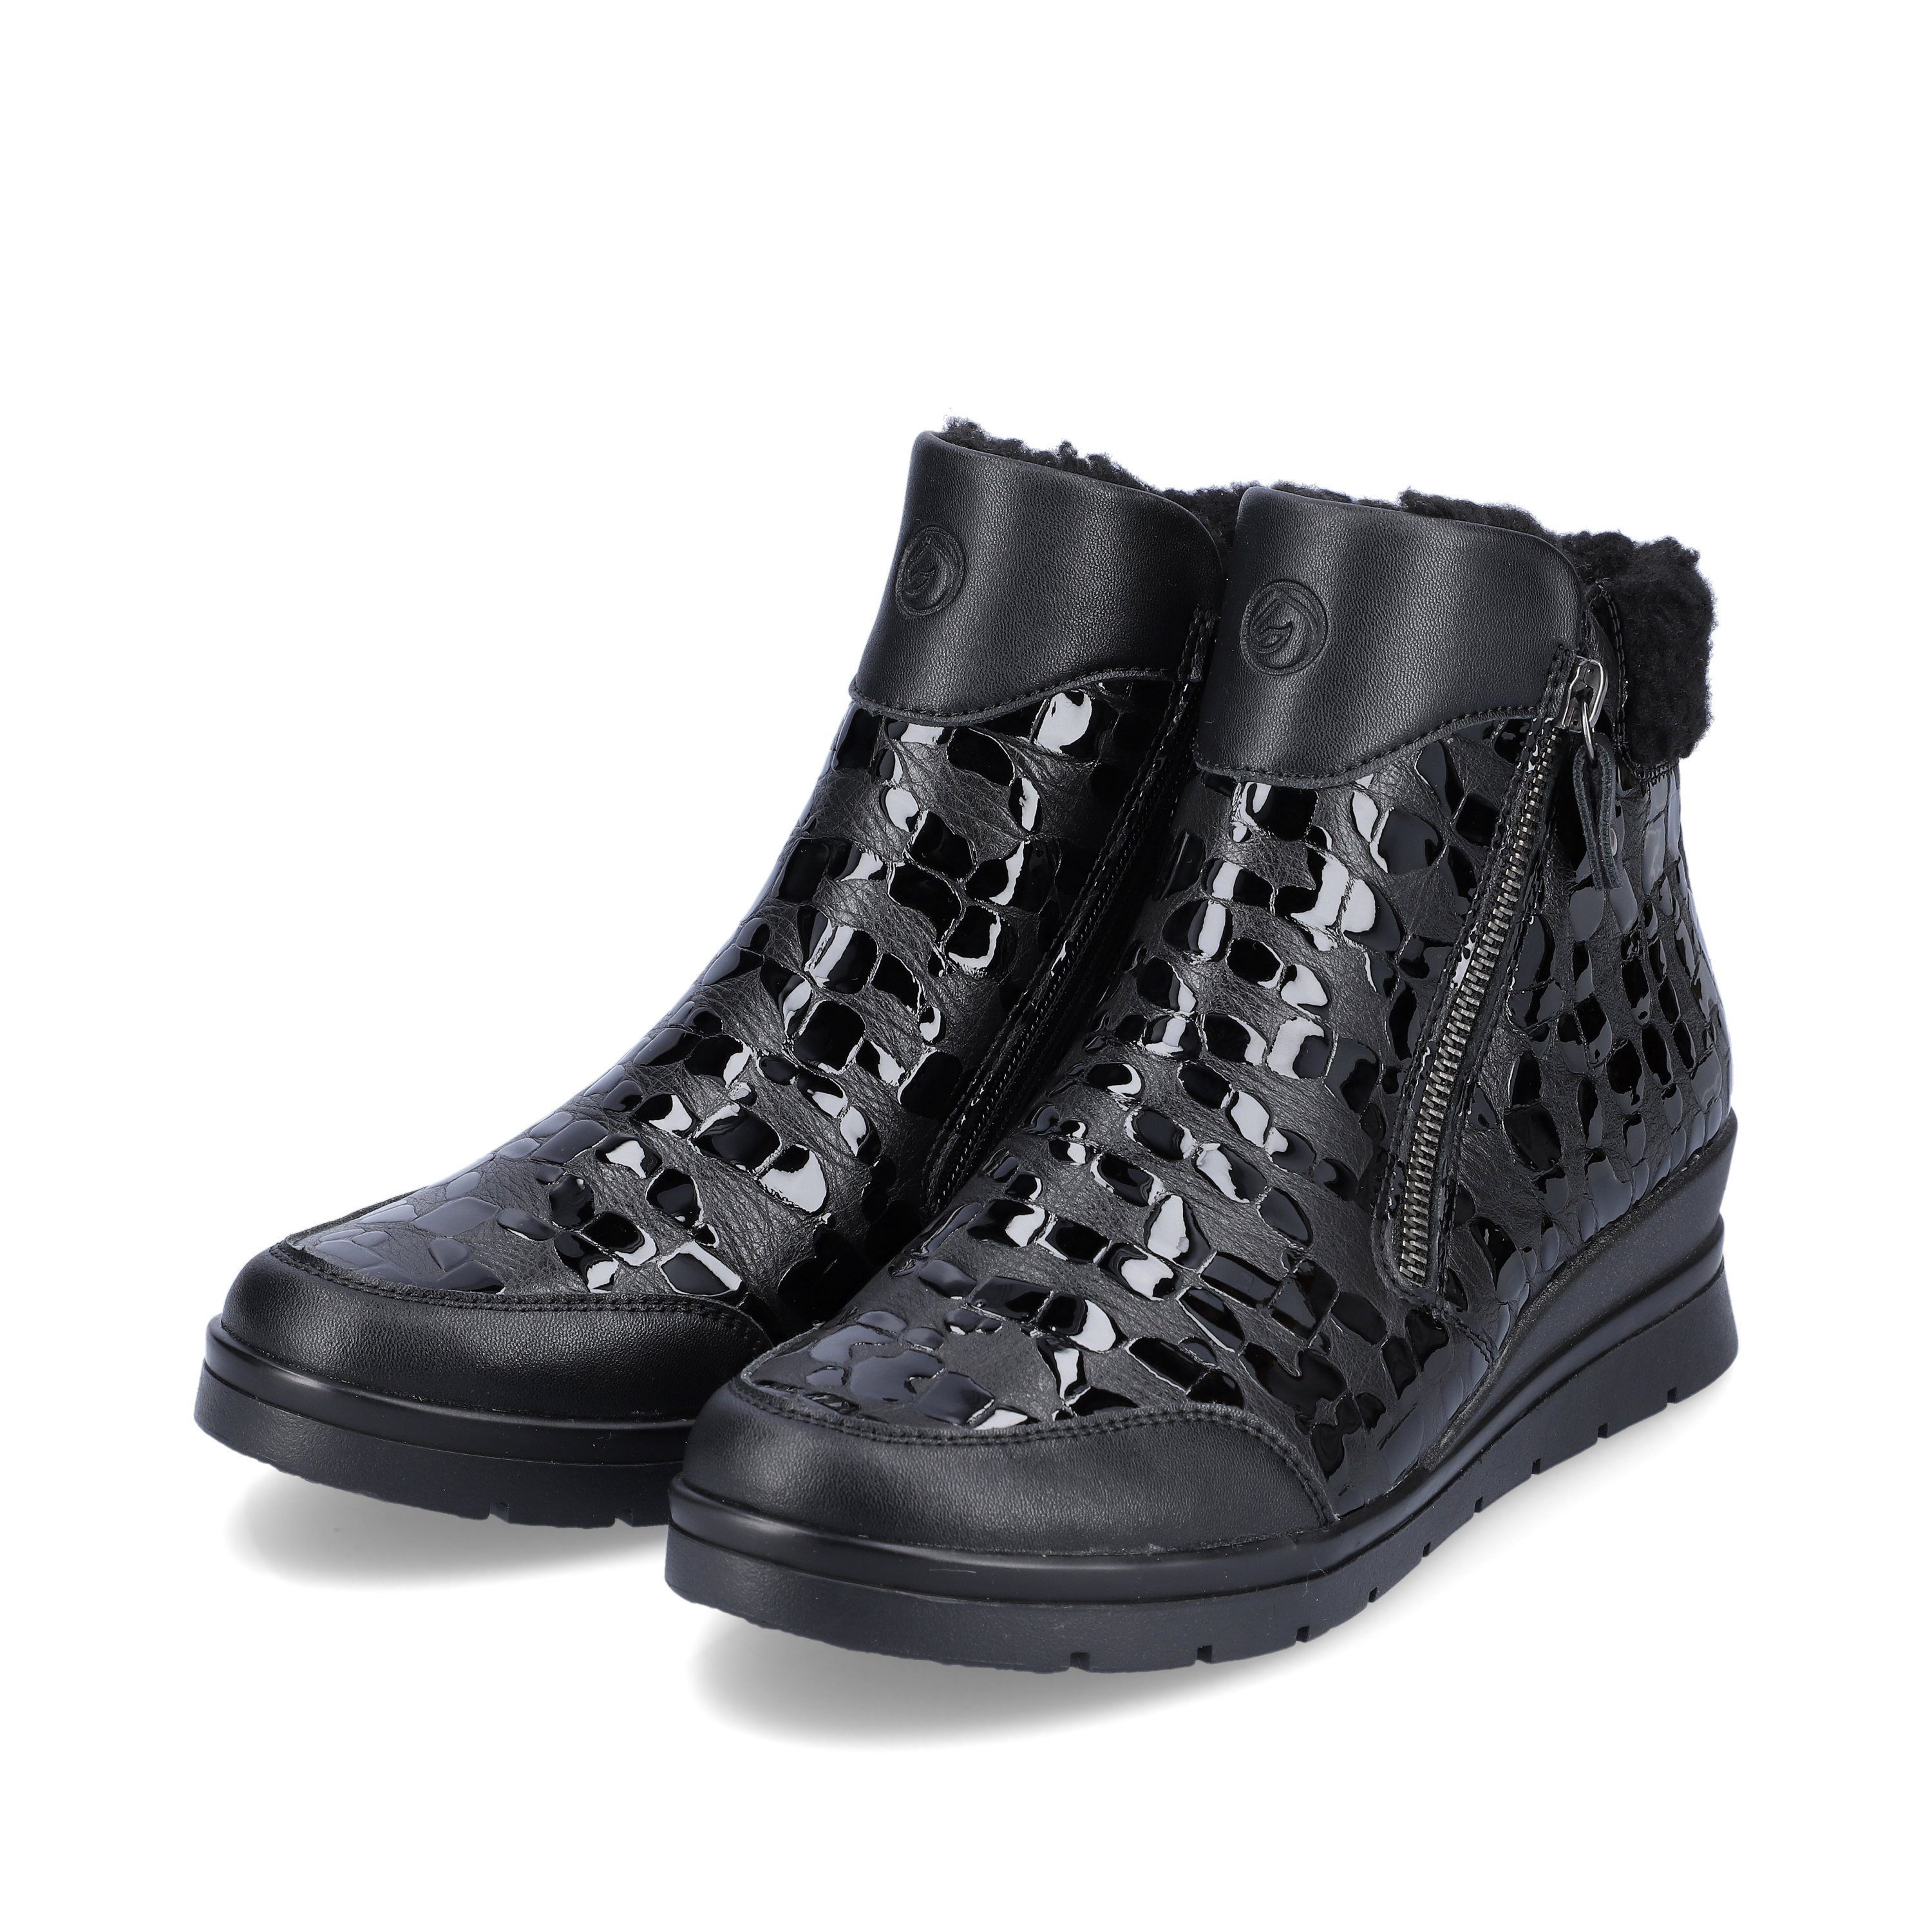 Glossy black remonte women´s ankle boots R0775-03 with flexible profile sole. Shoe laterally